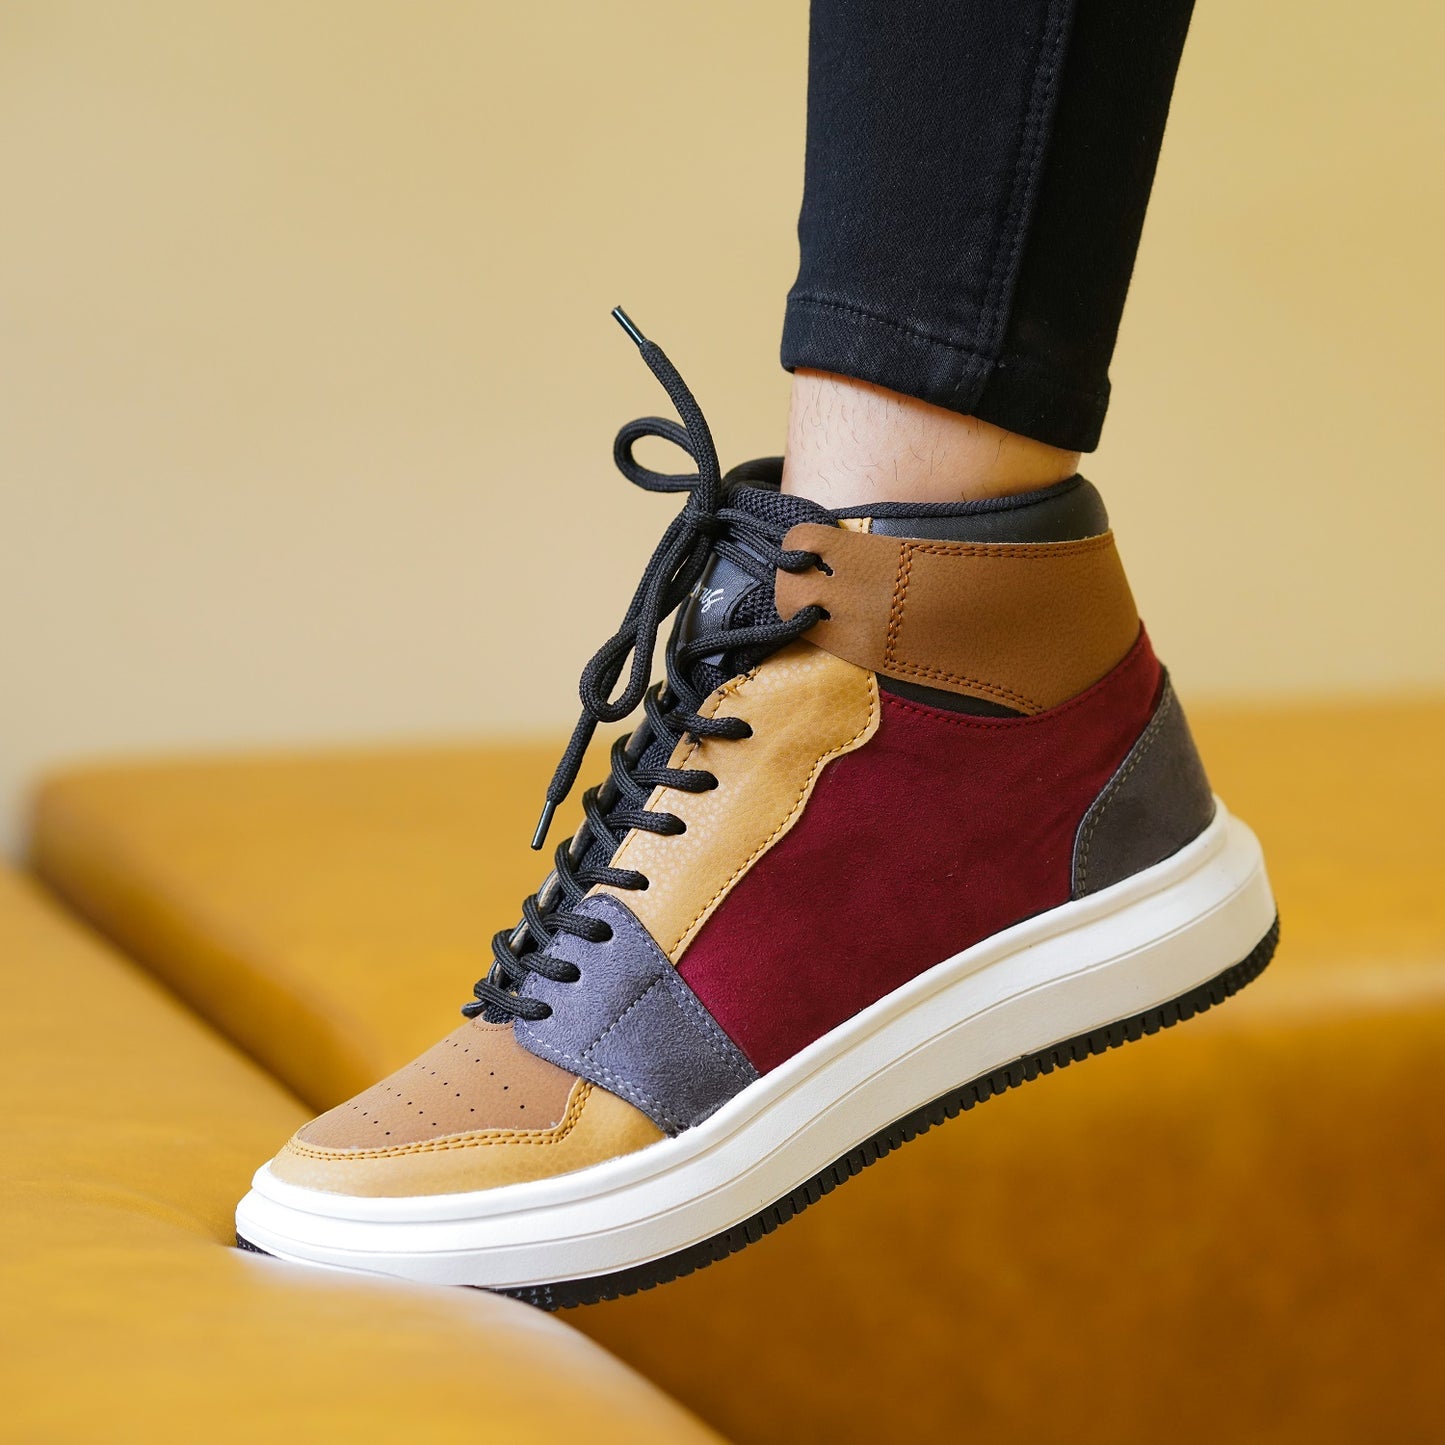 The Aurous Majesty Ankle High Sneakers